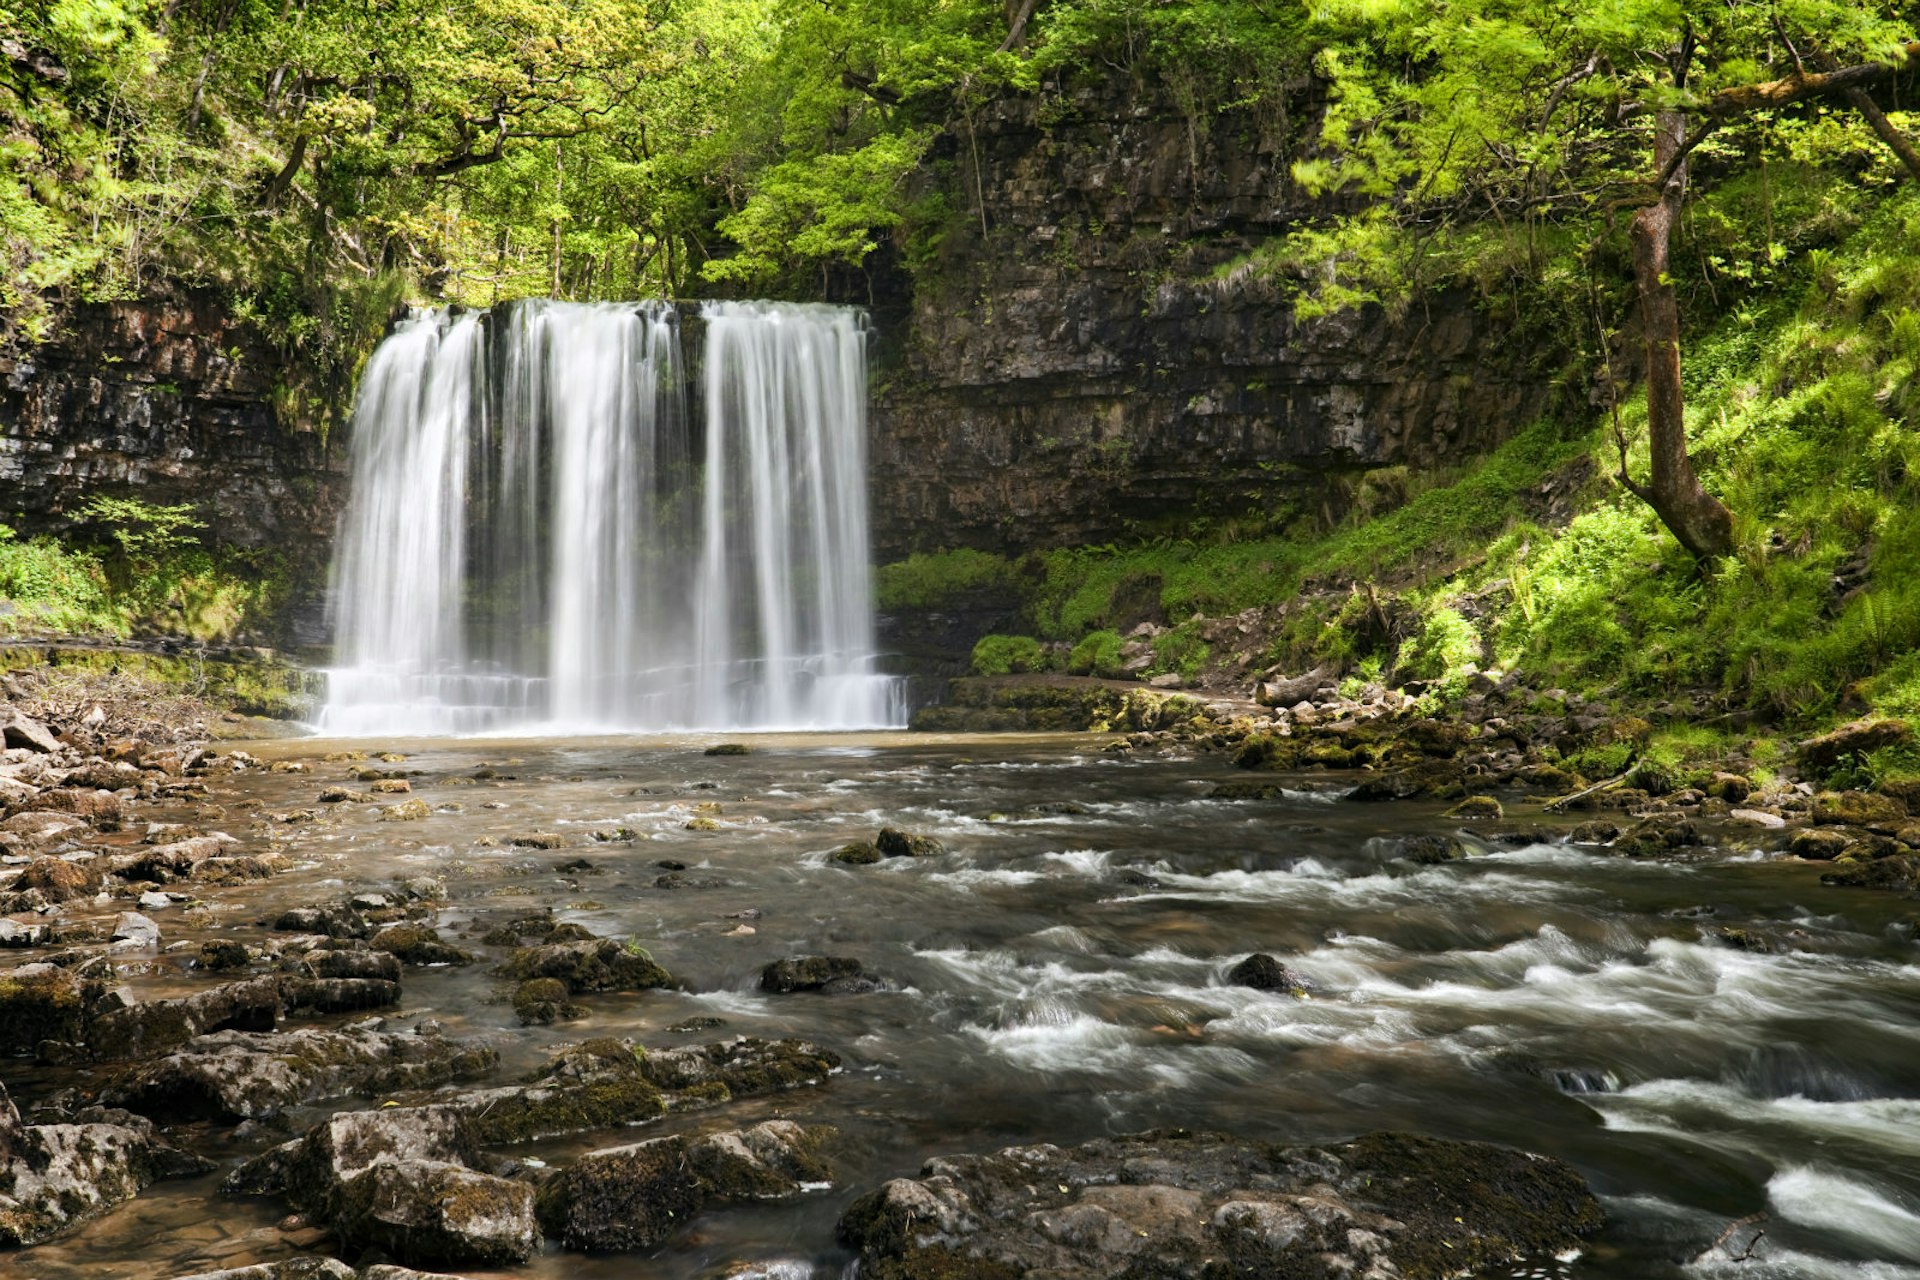 Visitors to the Brecon Beacons can walk behind the beautiful Sgwd-yr-Eira (the Snow Waterfall) © Martyn Ferry / Getty Images